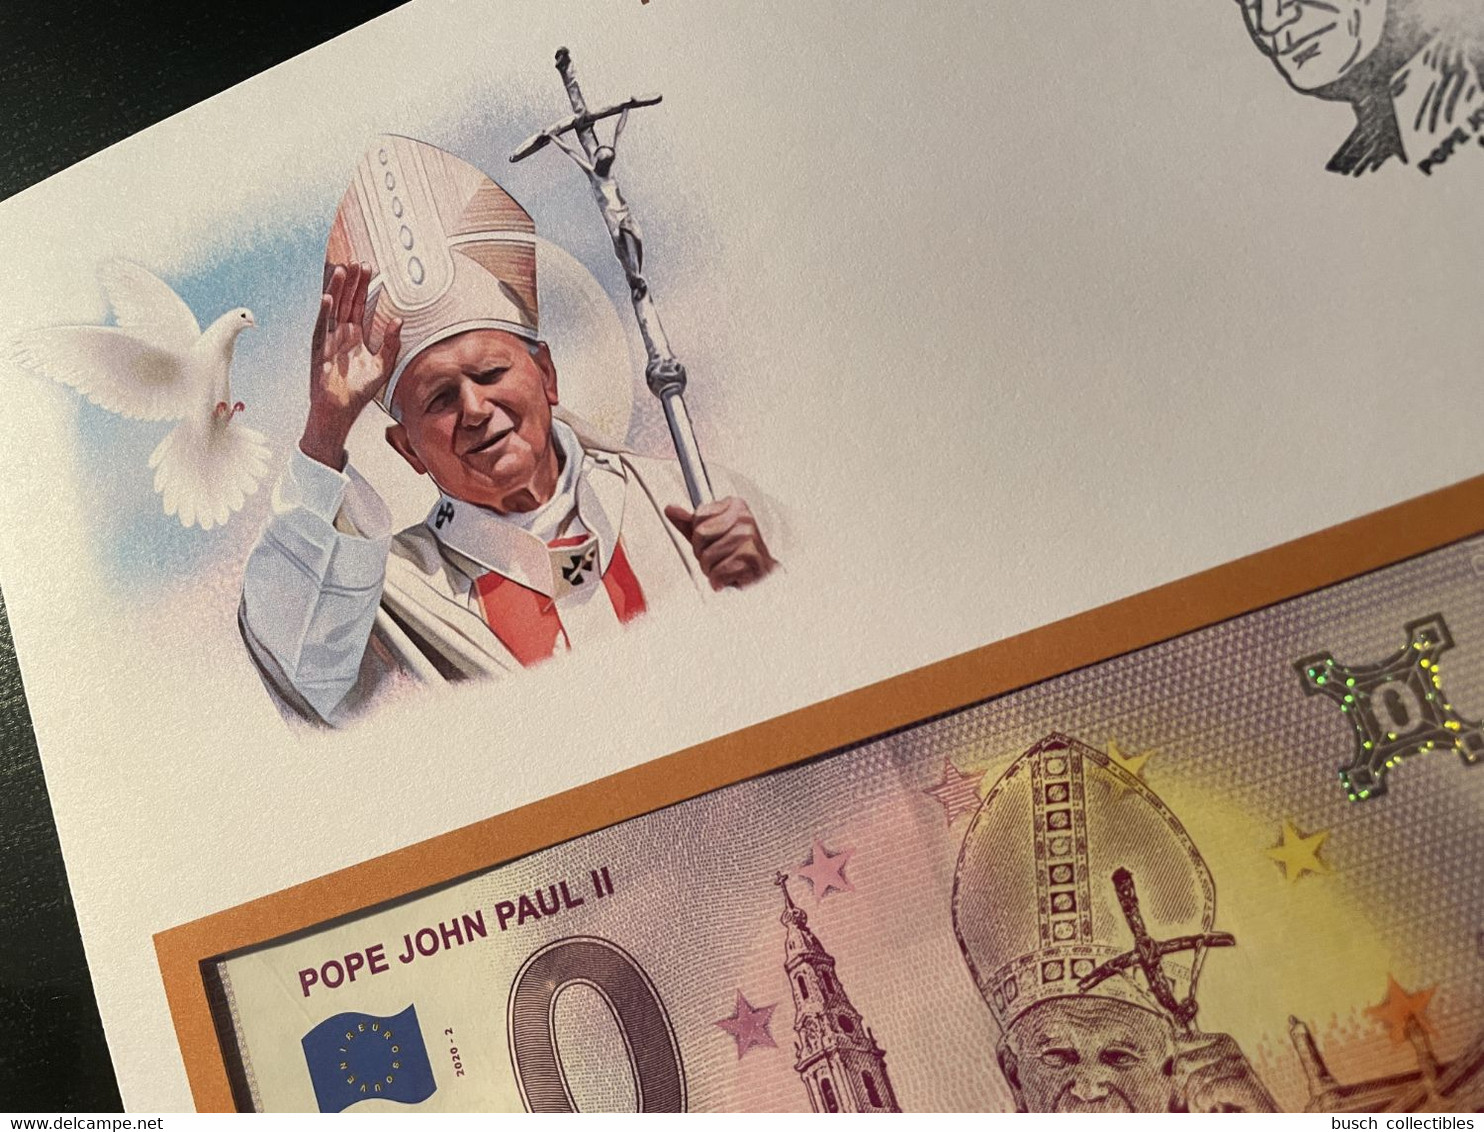 Euro Souvenir Banknote Cover Pape Pope Pape John Paul Johannes Jean II 100th Anniversary Vatican Djibouti Banknotenbrief - Private Proofs / Unofficial